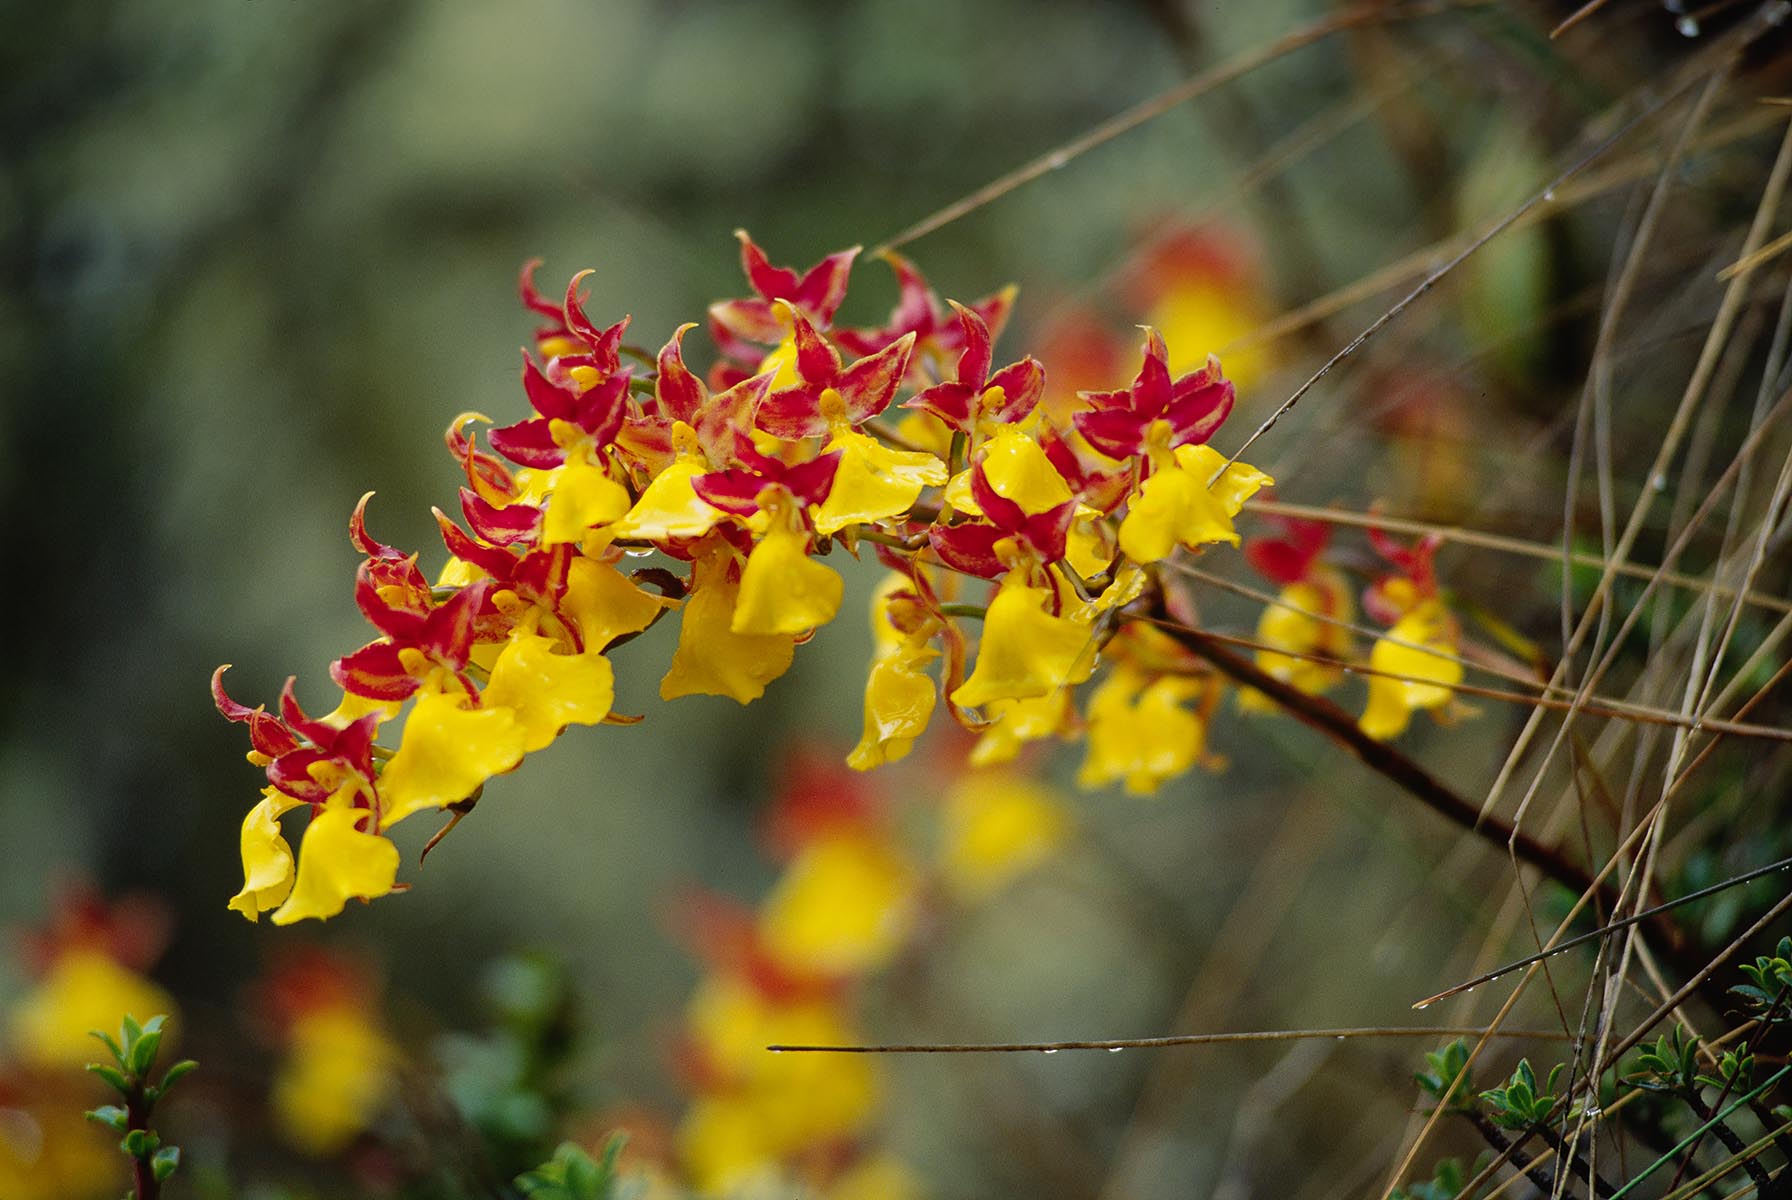 Beautiful YELLOW ORCHID found commonly near the Ruins of  SAYACMARCA on the INCA TRAIL TO MACHU PICCHU - PERUVIAN ANDES